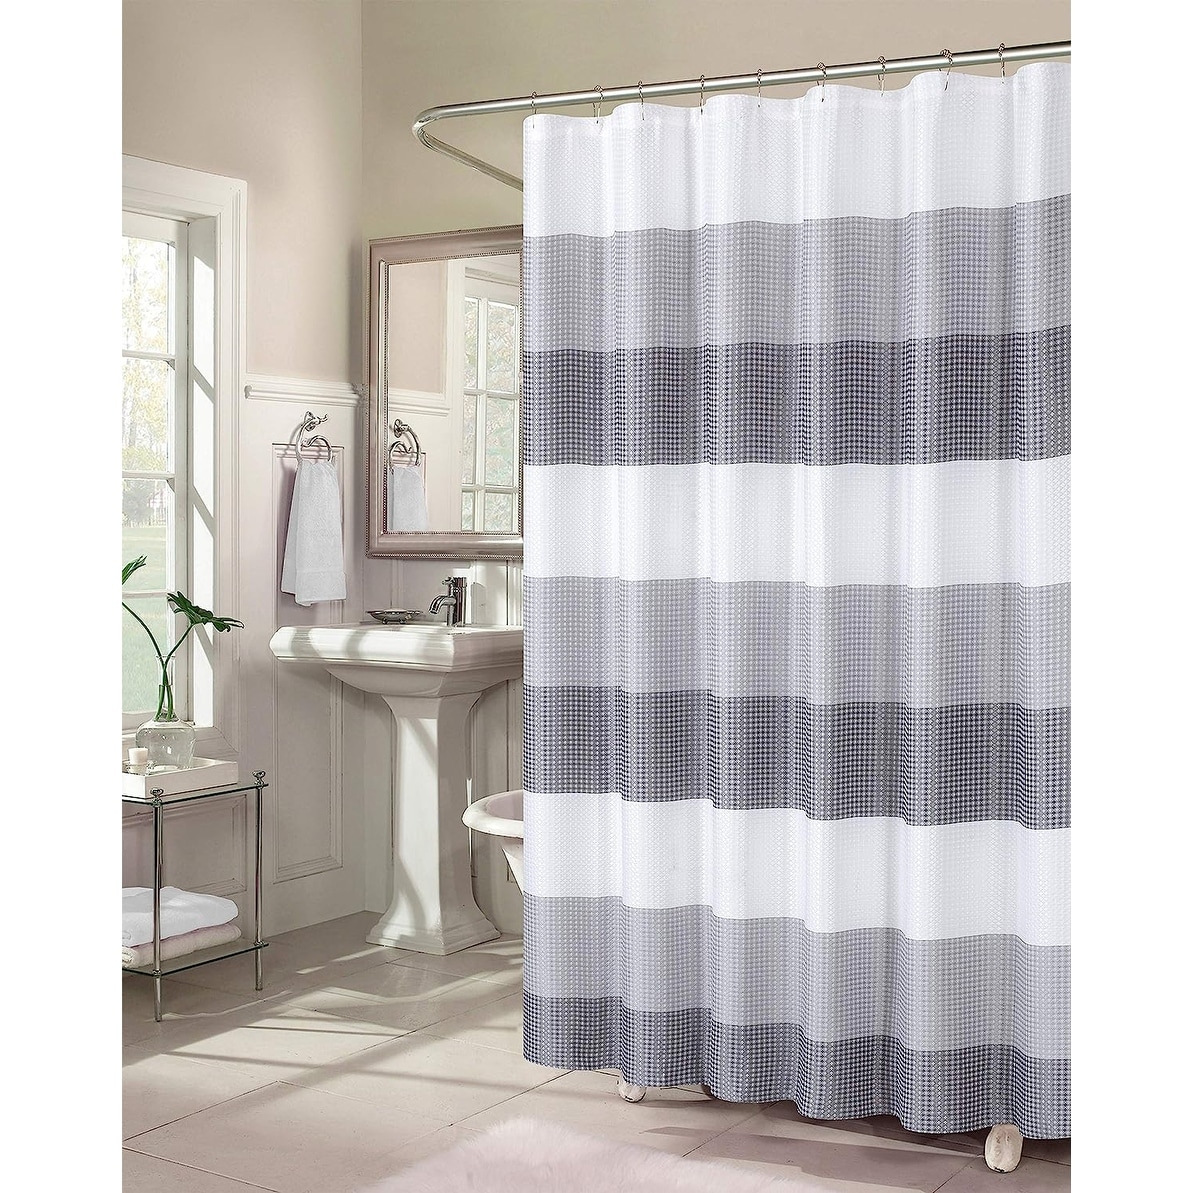 https://ak1.ostkcdn.com/images/products/is/images/direct/a73152ecb2a5393ab8707c9a6b44bd8d9a5e2214/Dainty-Home-Striped-Ombre-Waffle-Weave-Fabric-Shower-Curtain.jpg